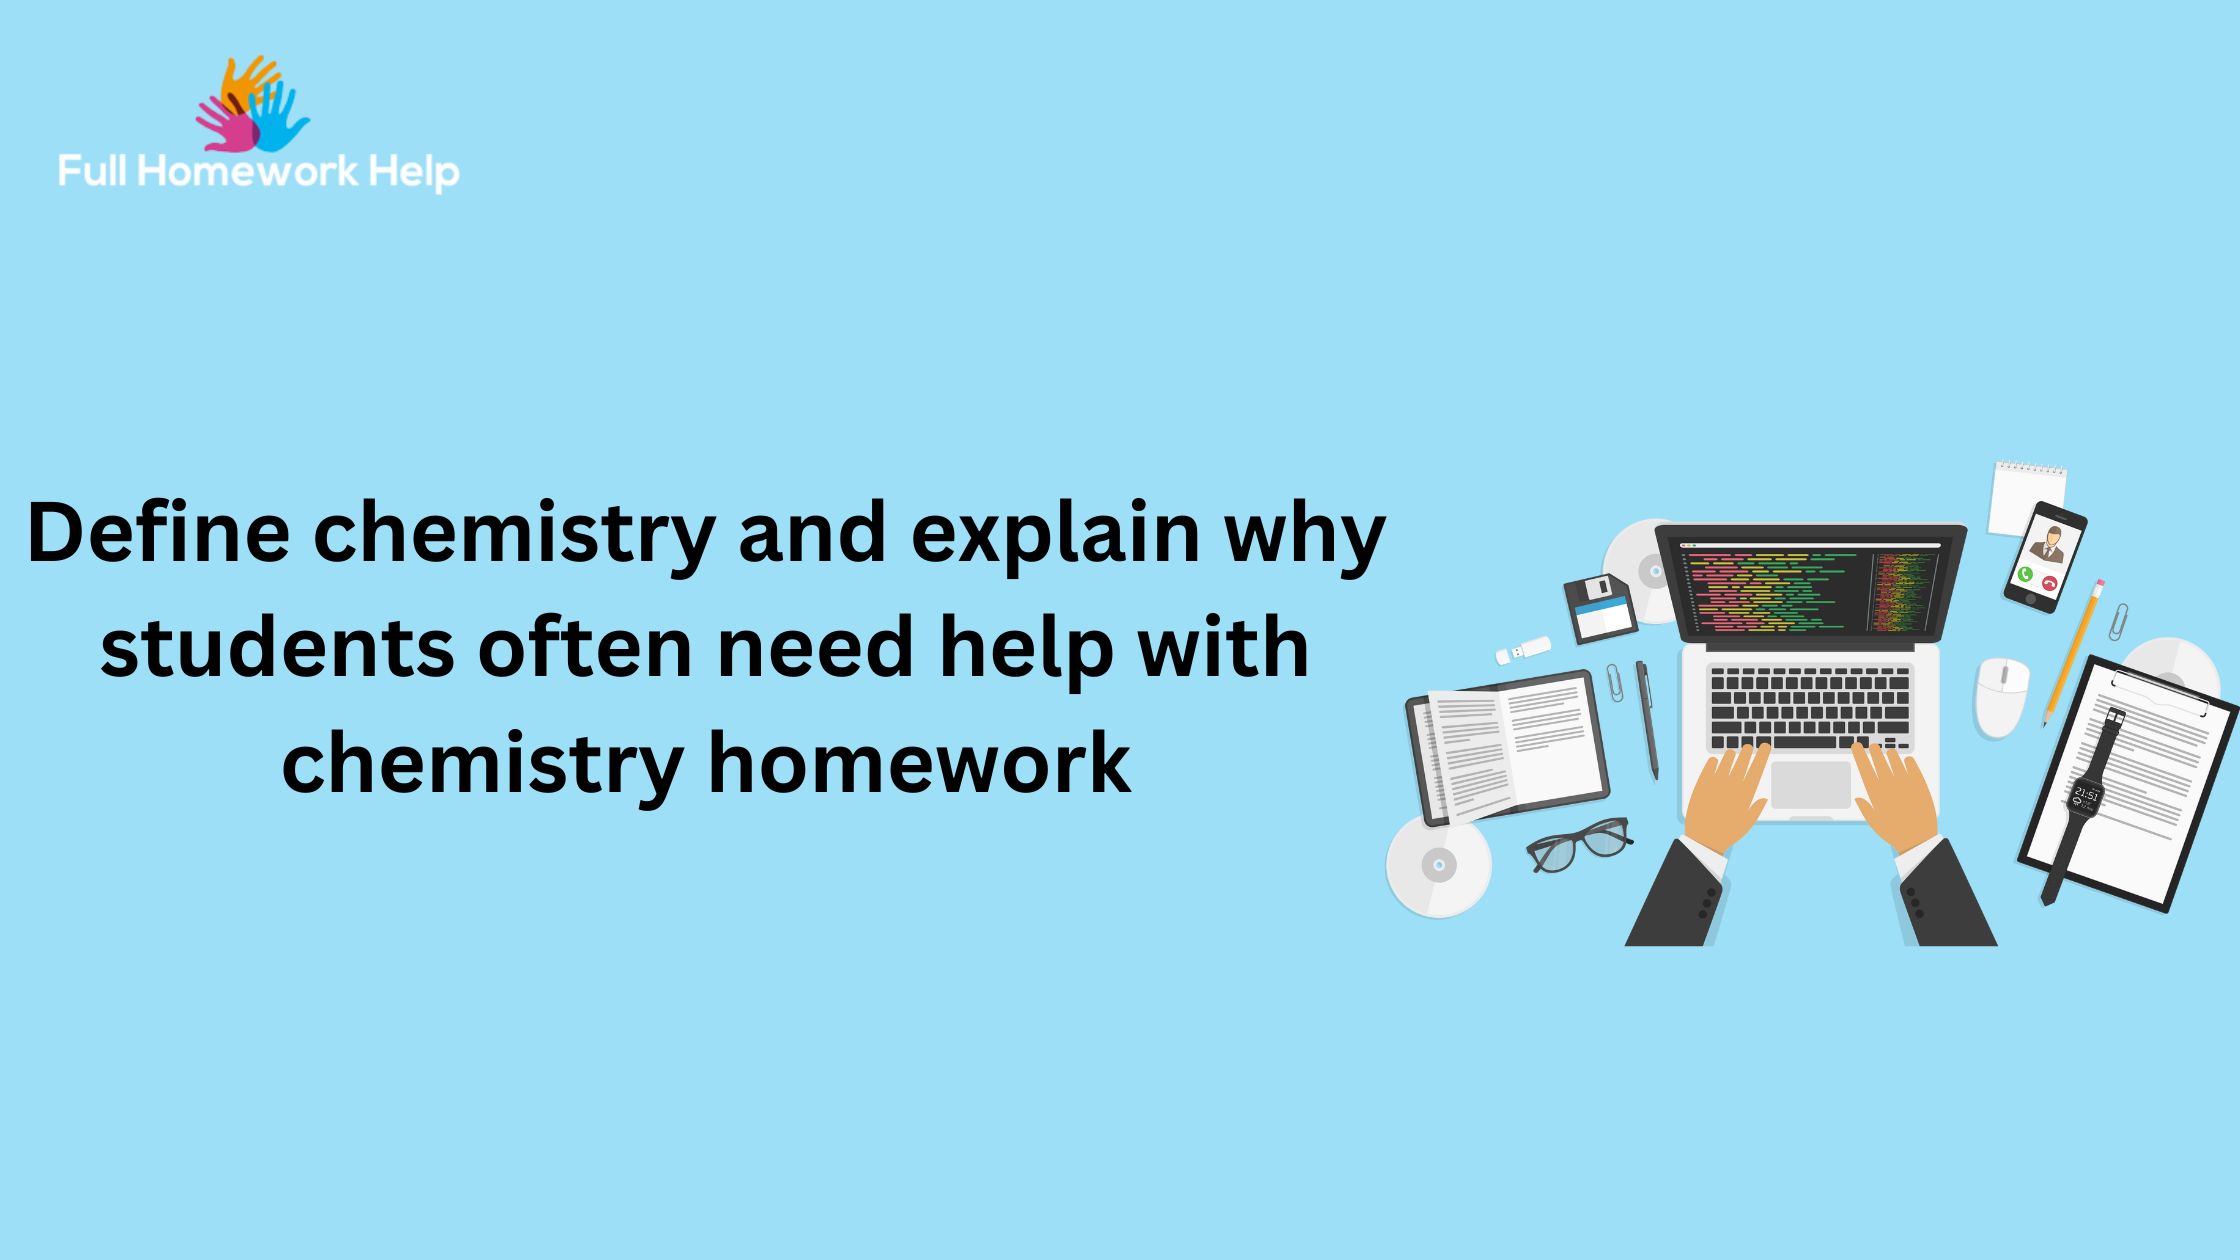 Define chemistry and explain why students often need help with chemistry homework